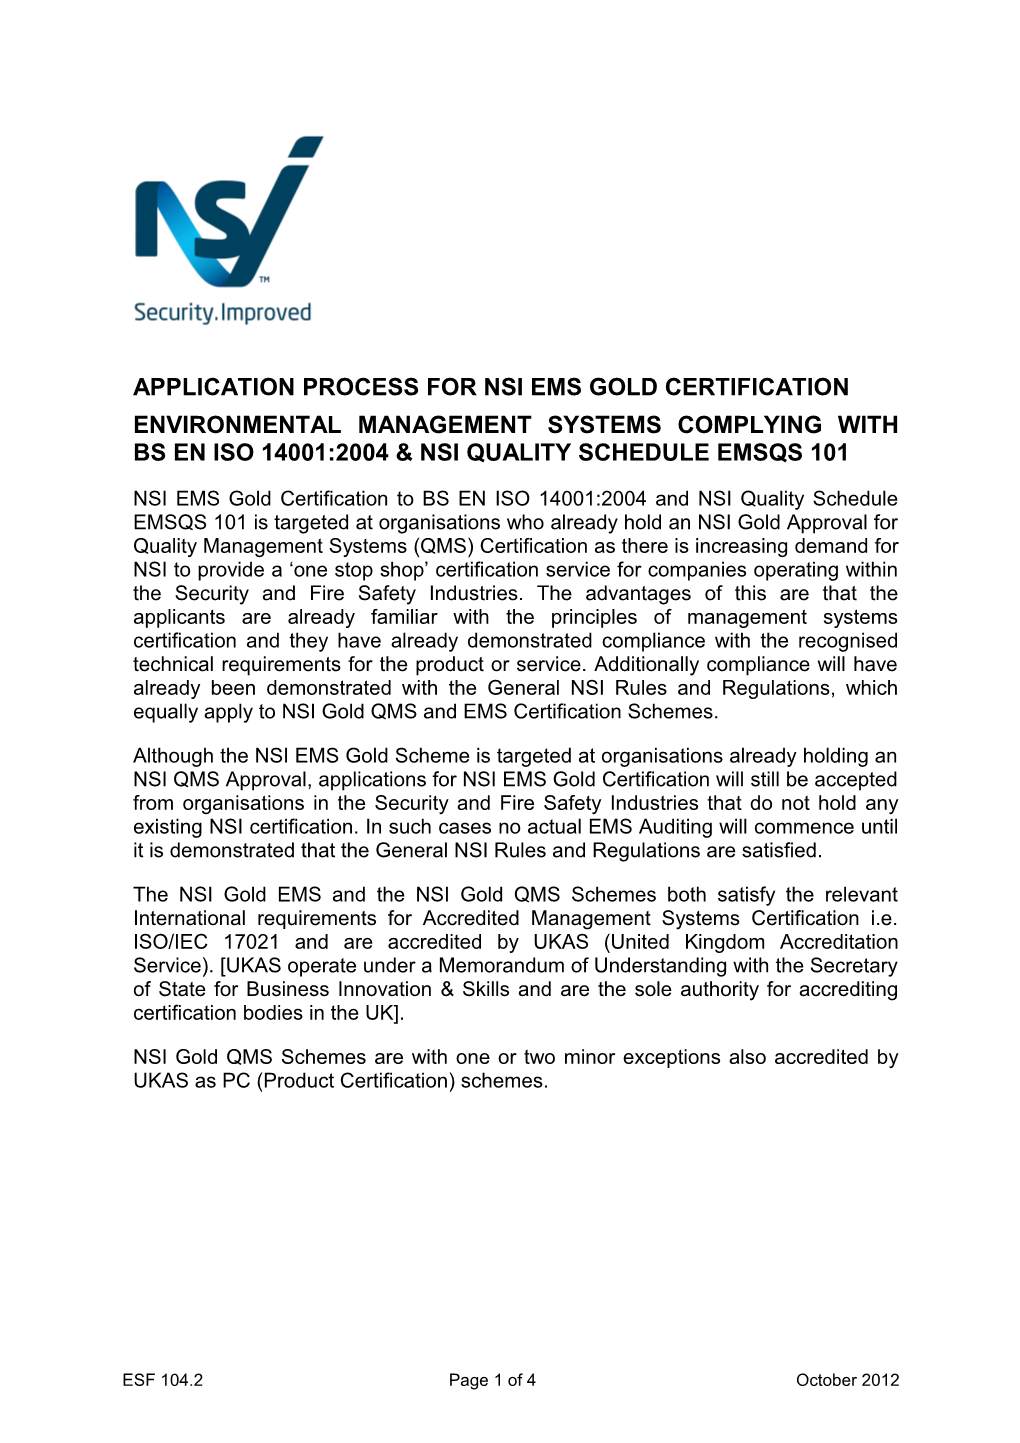 Application Process for Nsi Ems Gold Certification